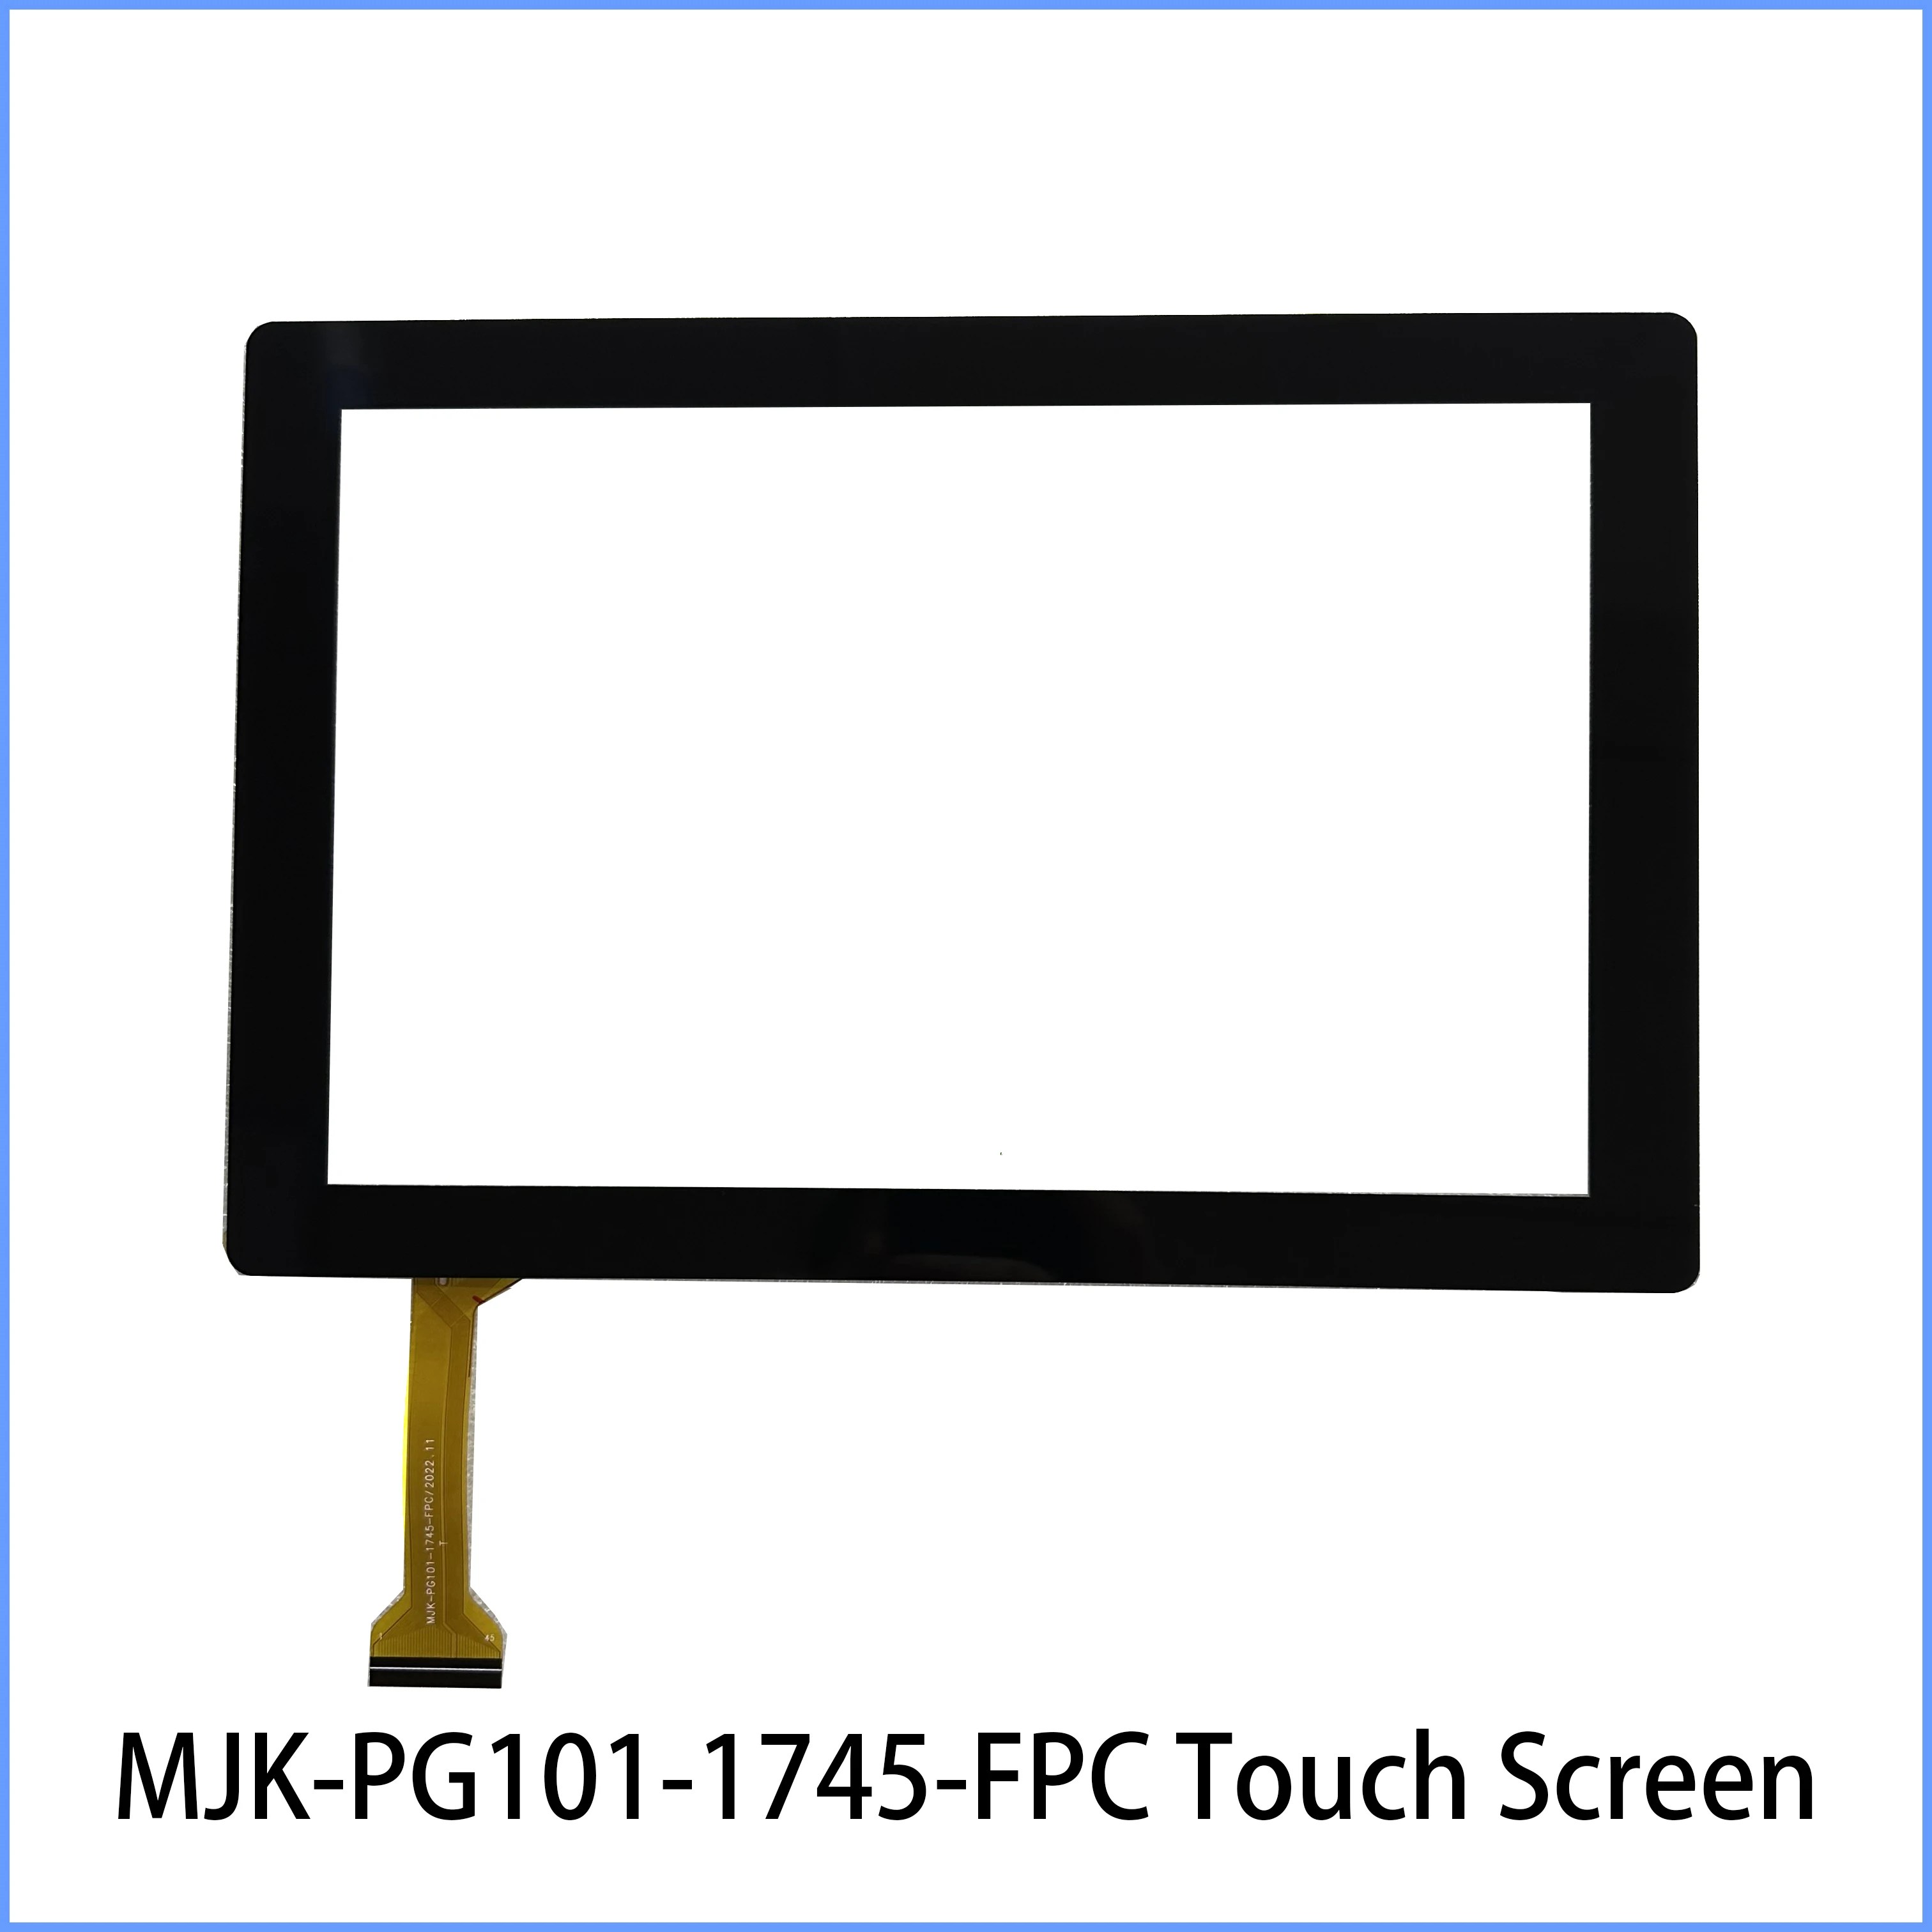 

New Touch 10.1 inch P/N MJK-PG101-1745-FPC Tablet Repair Capacitive Digitizer Touch Panel Sensor MJK -PG101 -1745 -FPC